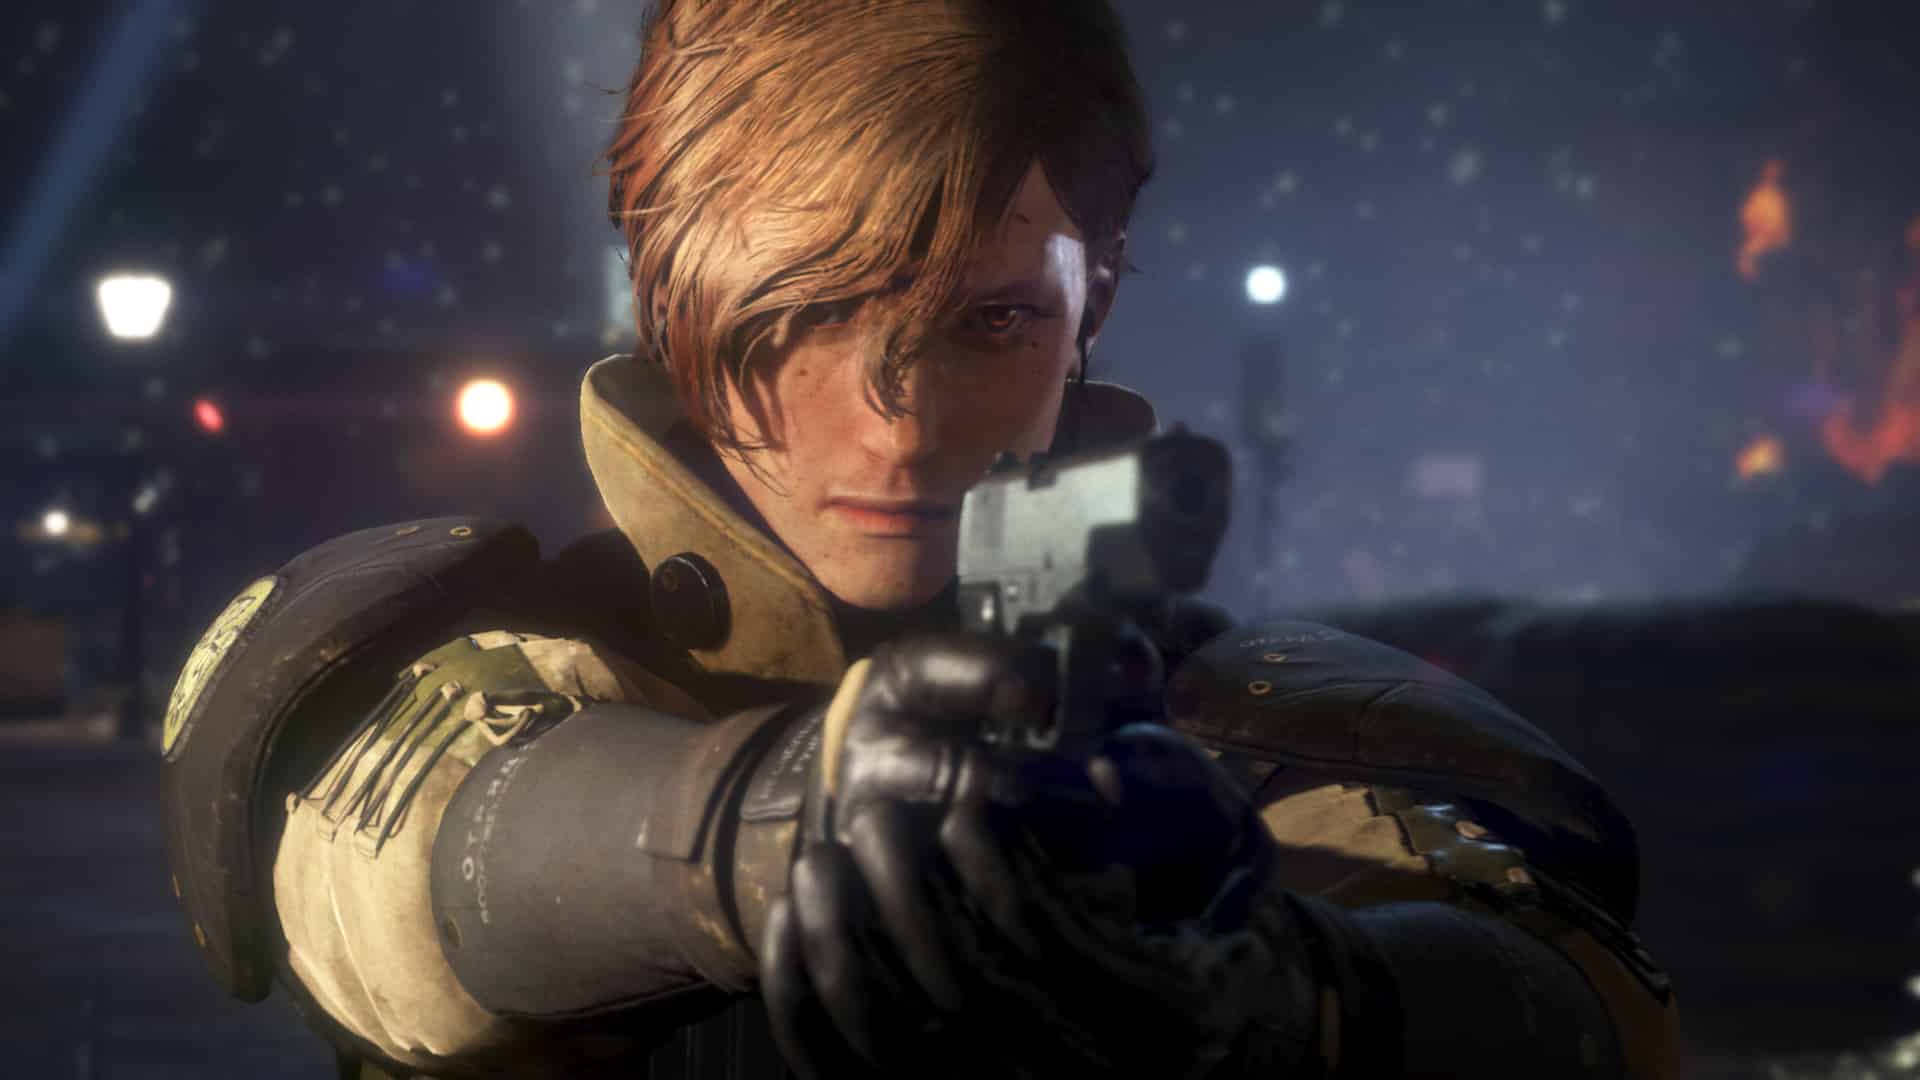 Left Alive Ilinx Square Enix Front Mission survival stealth spin-off offers hope and choice, unlike The Last of Us Part II Naughty Dog